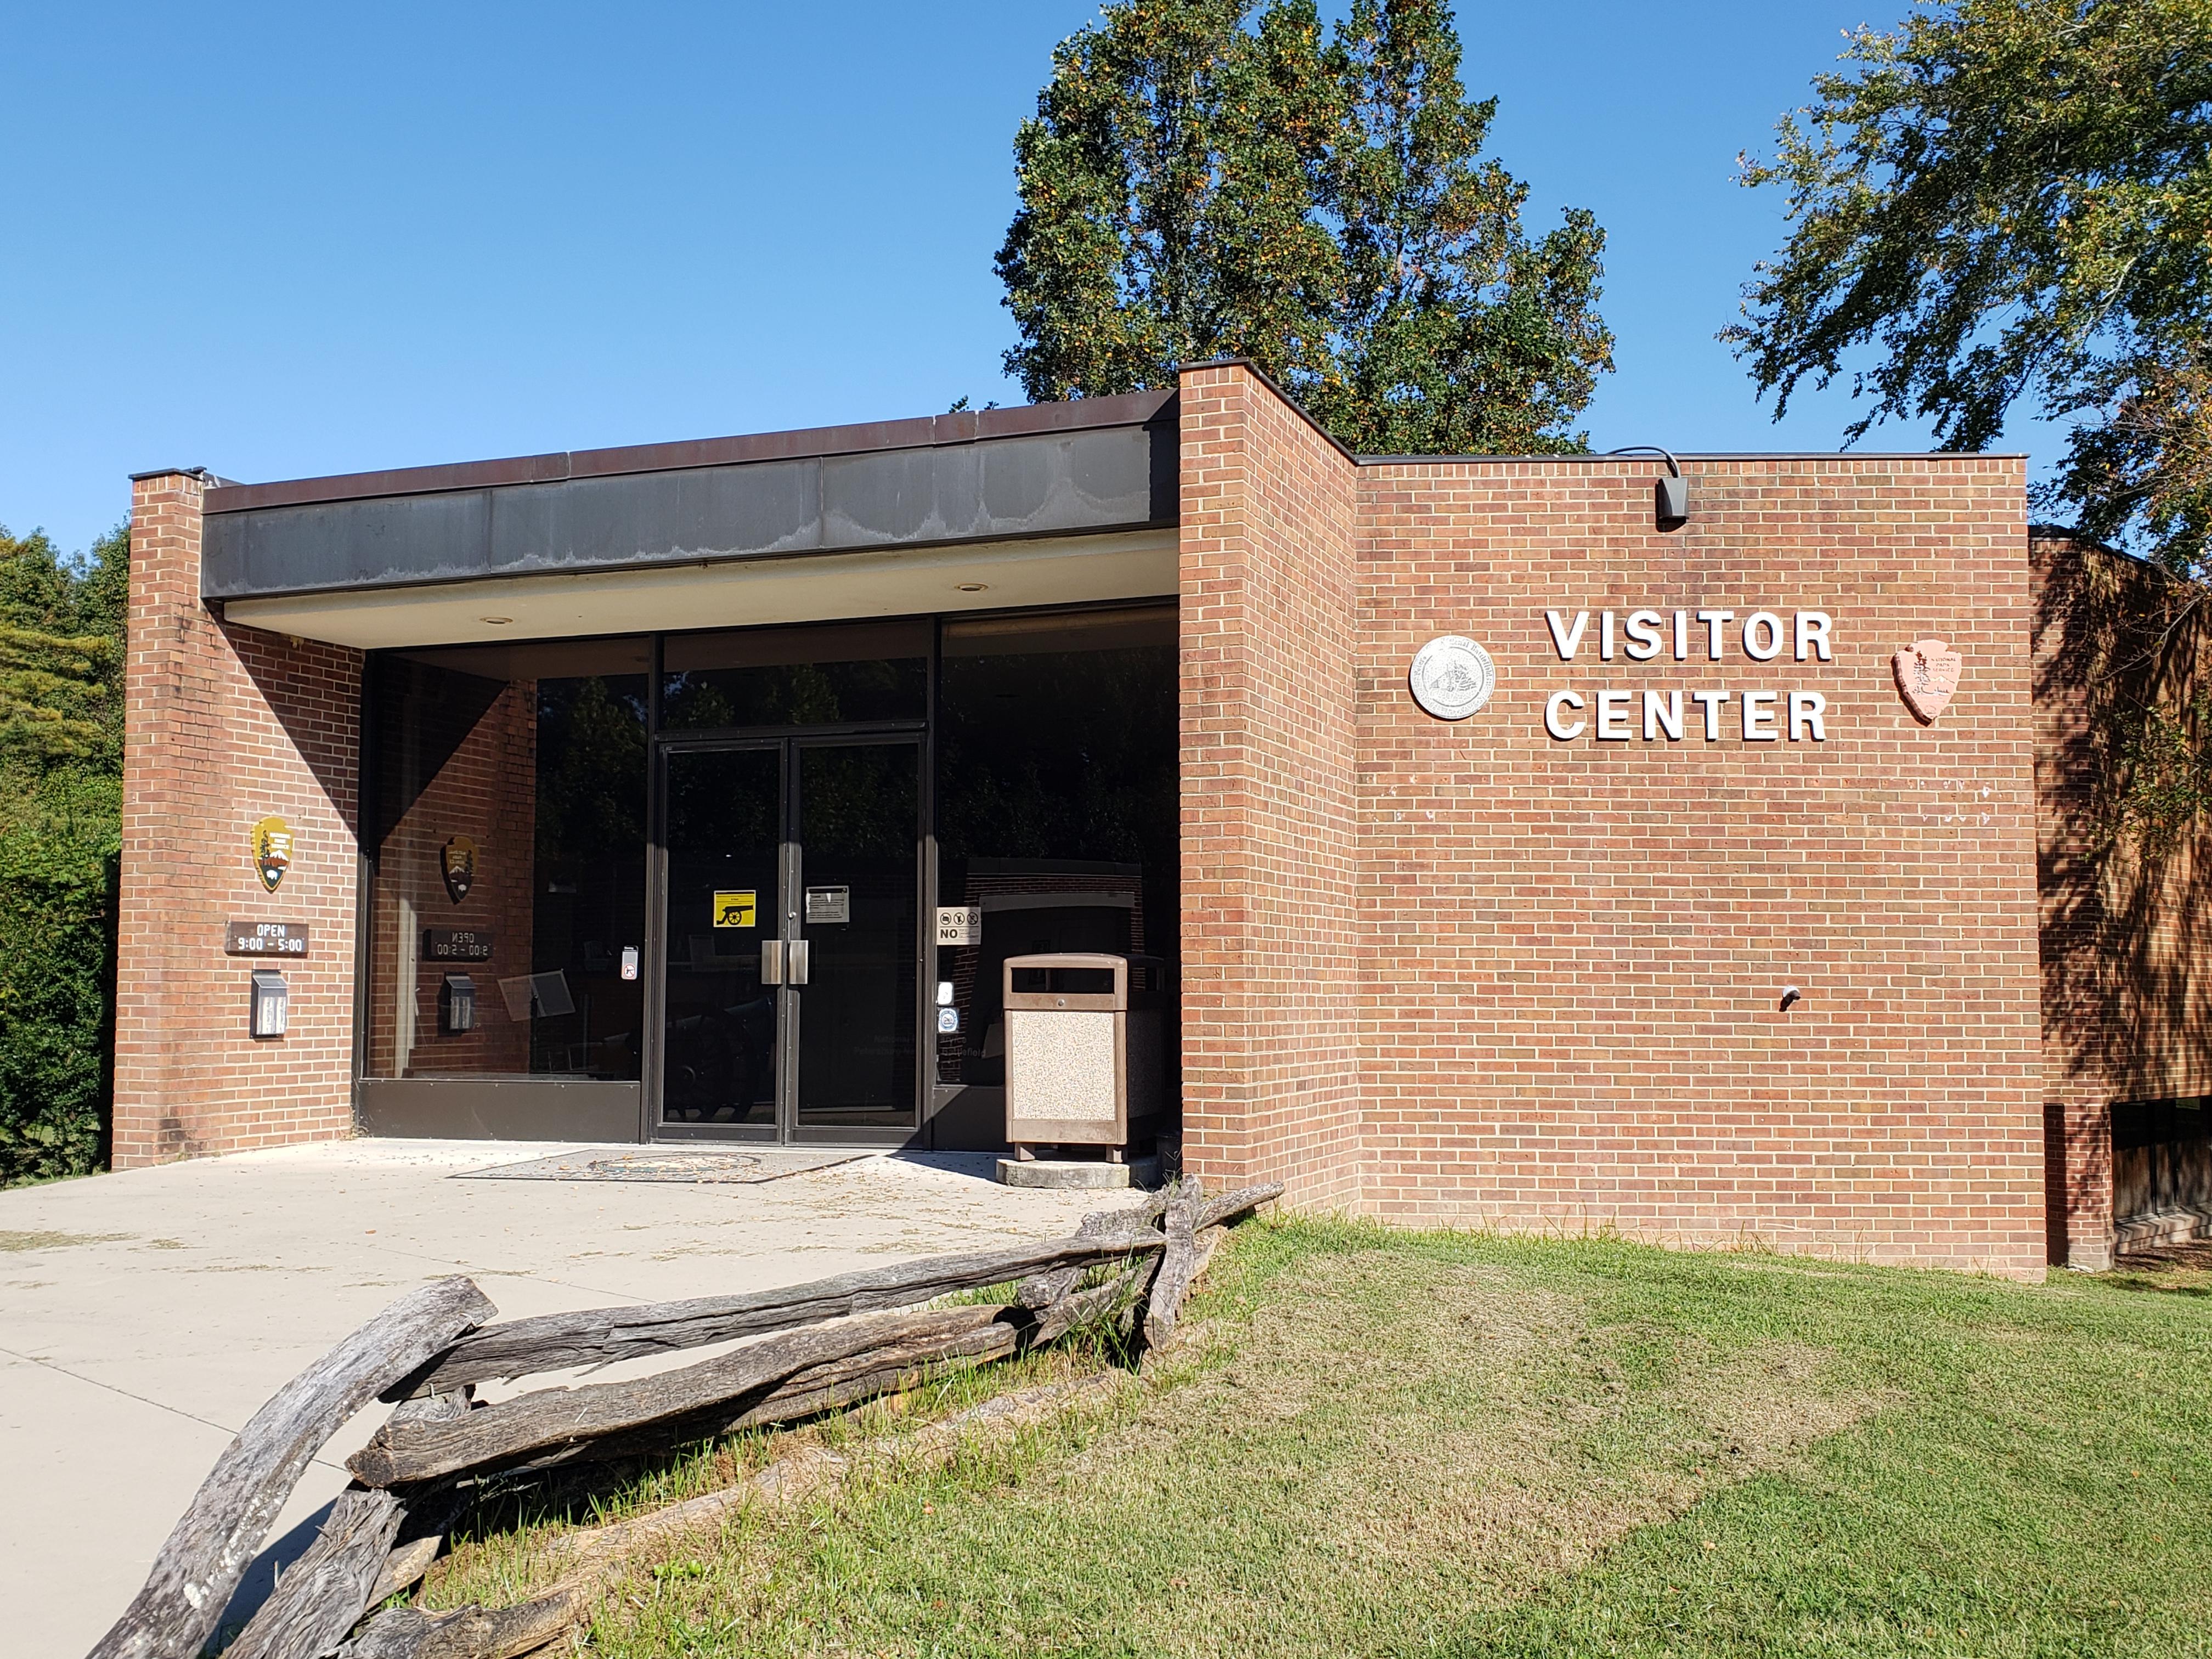 Pictured is the front of the brick visitor center under a cloudless blue sky.